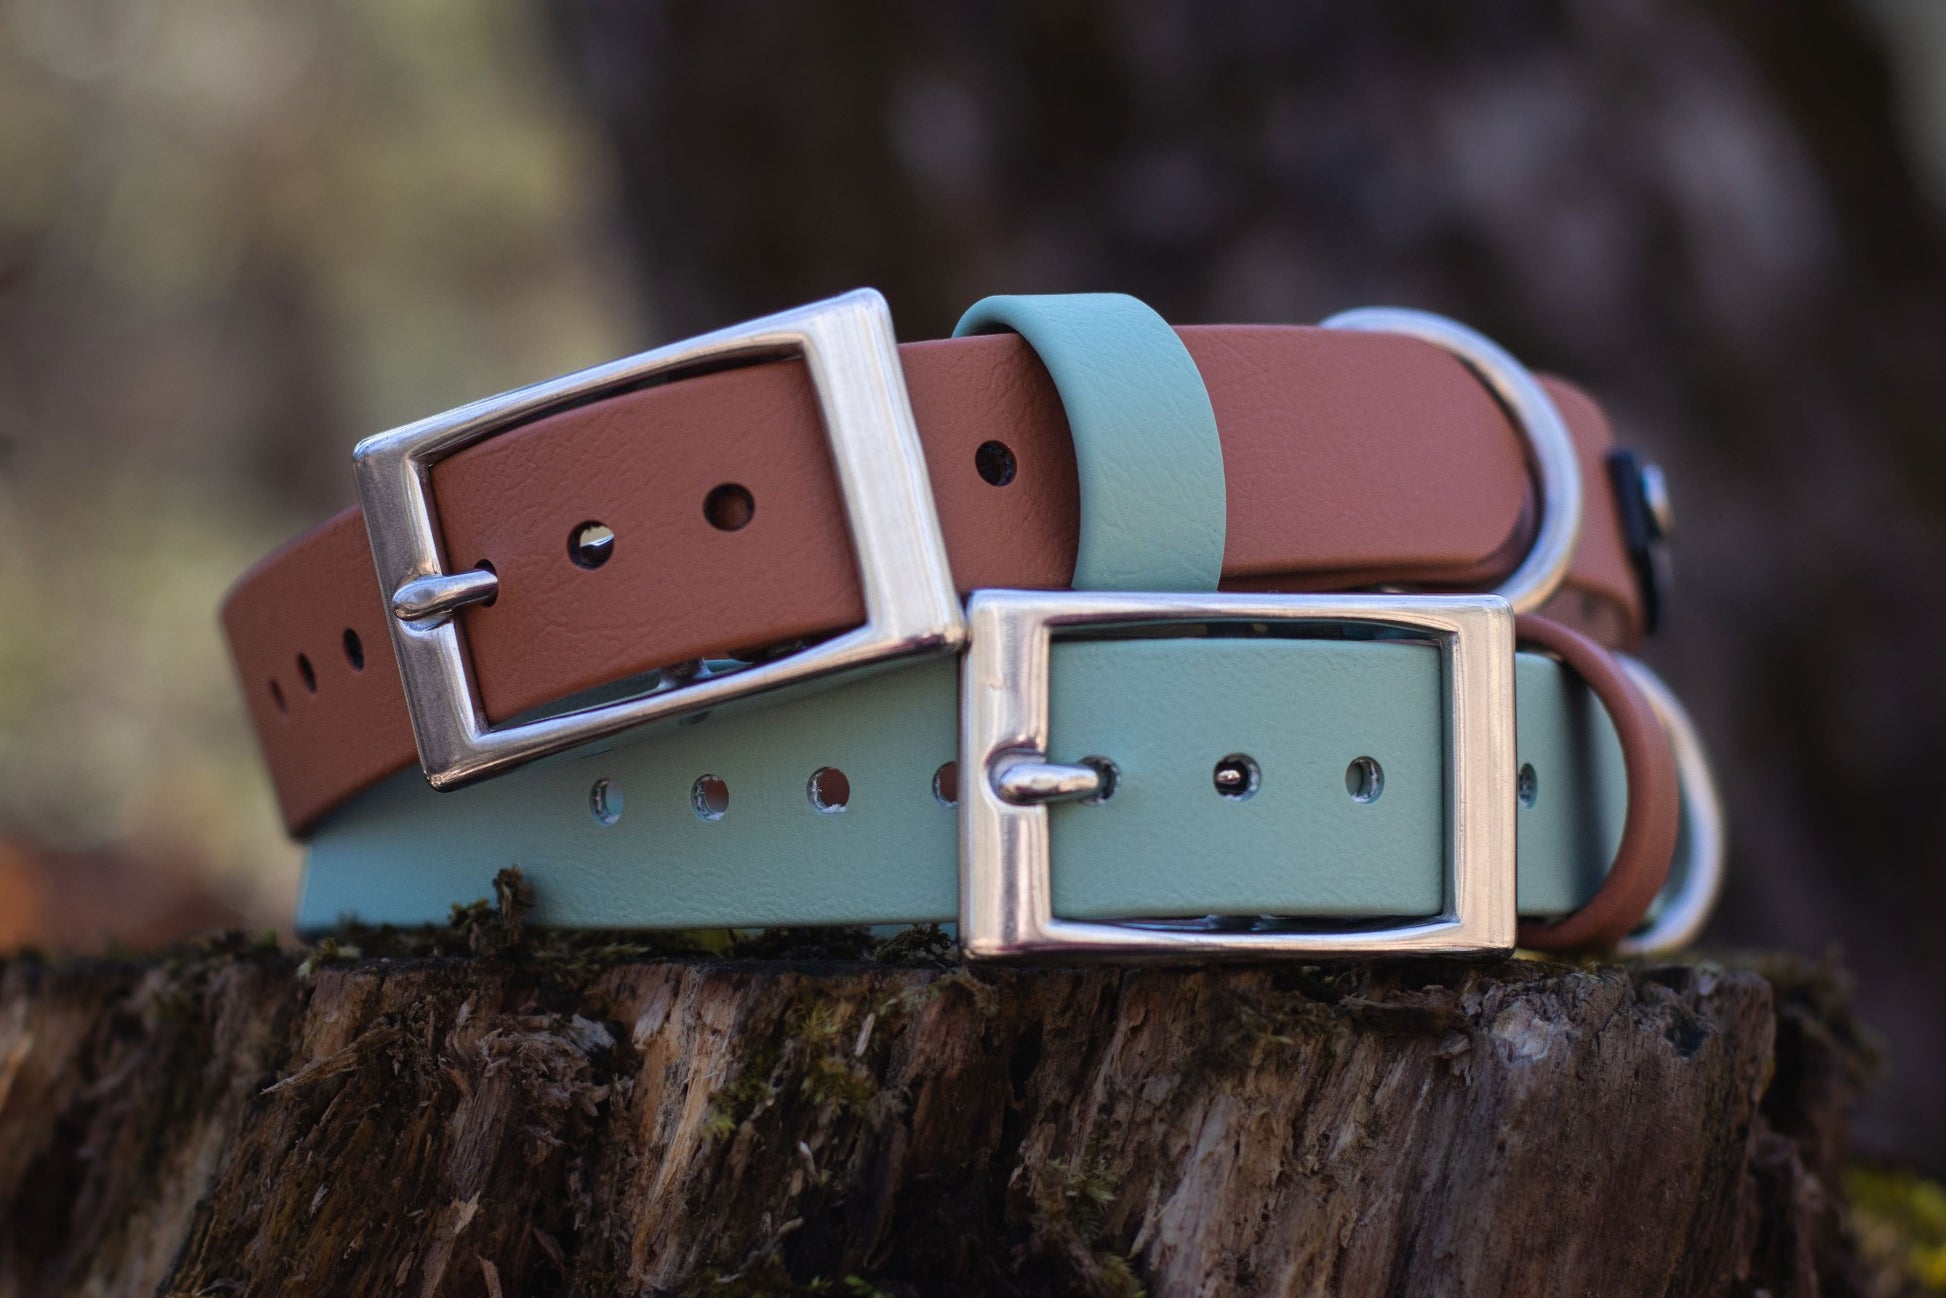 Backwoods Dog waterproof BioThane classic stainless steel buckle dog collar in sage green and cognac